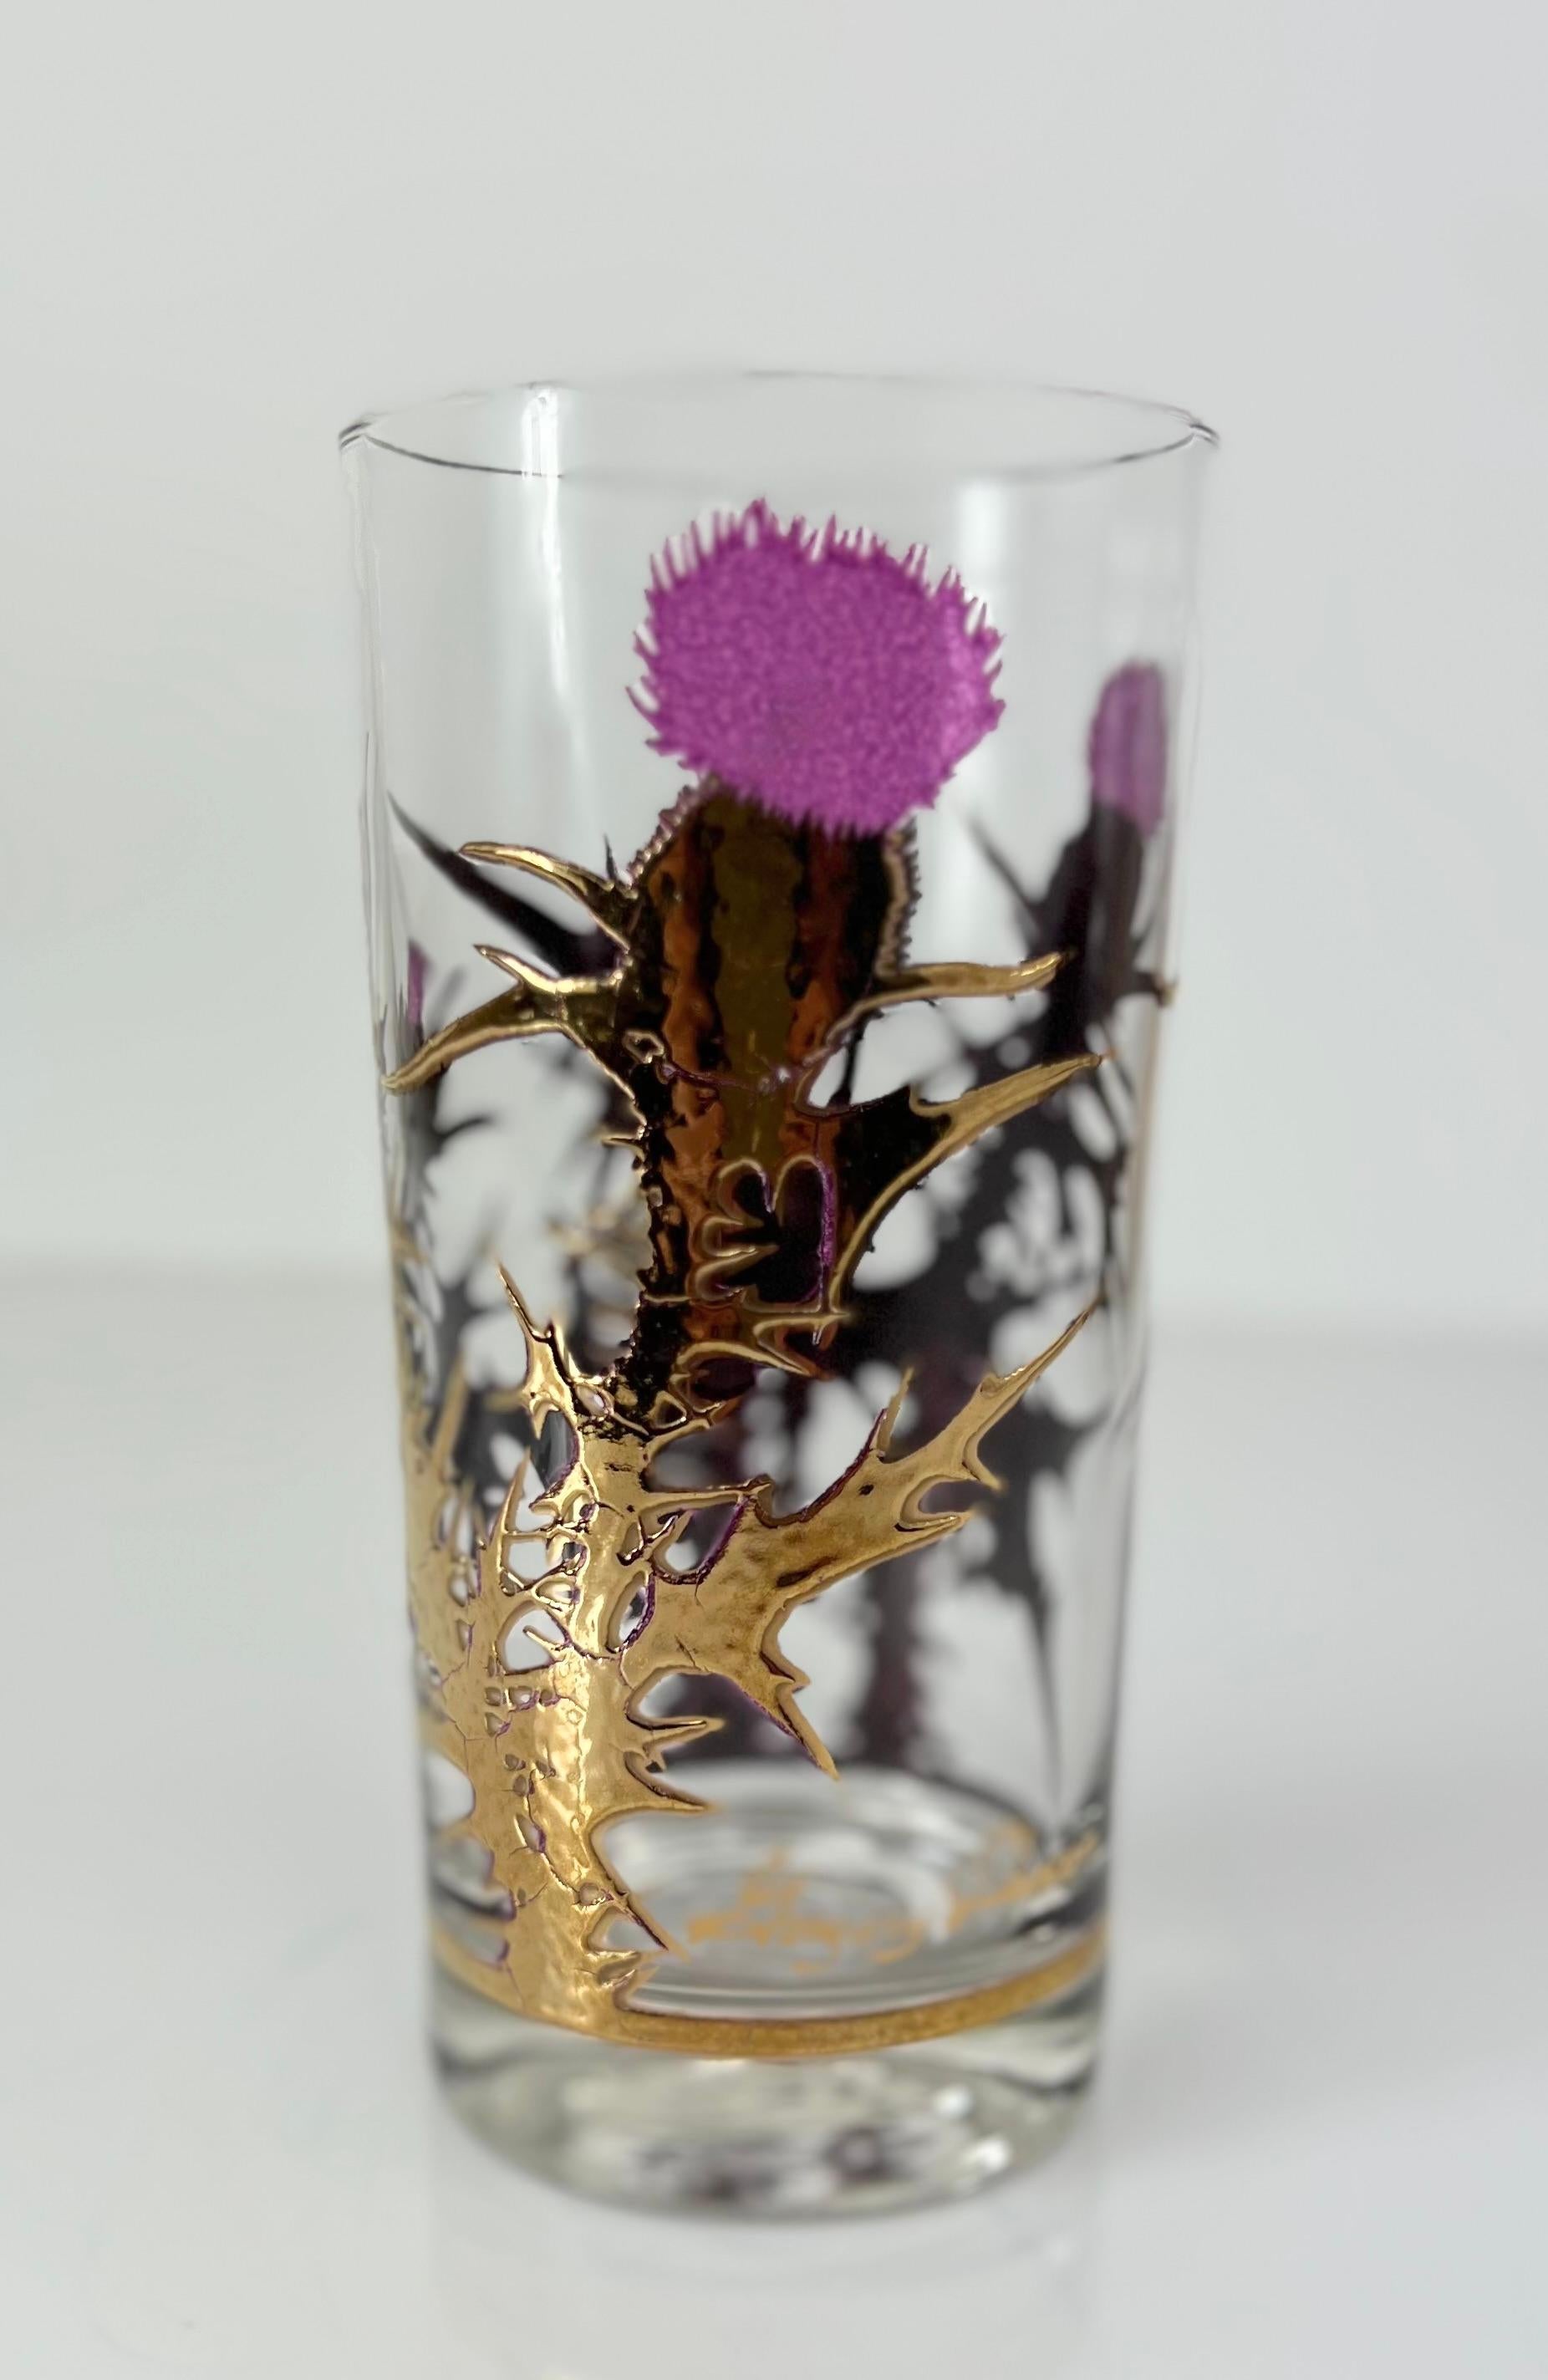 Stunning mid century modern glassware set by Gregory Duncan for West Virginia Glass.  This set of 8 “Thistle” pattern glasses feature raised texture 22 karat gold stem with translucent purple enamel thistle flower.  The set is easily the most